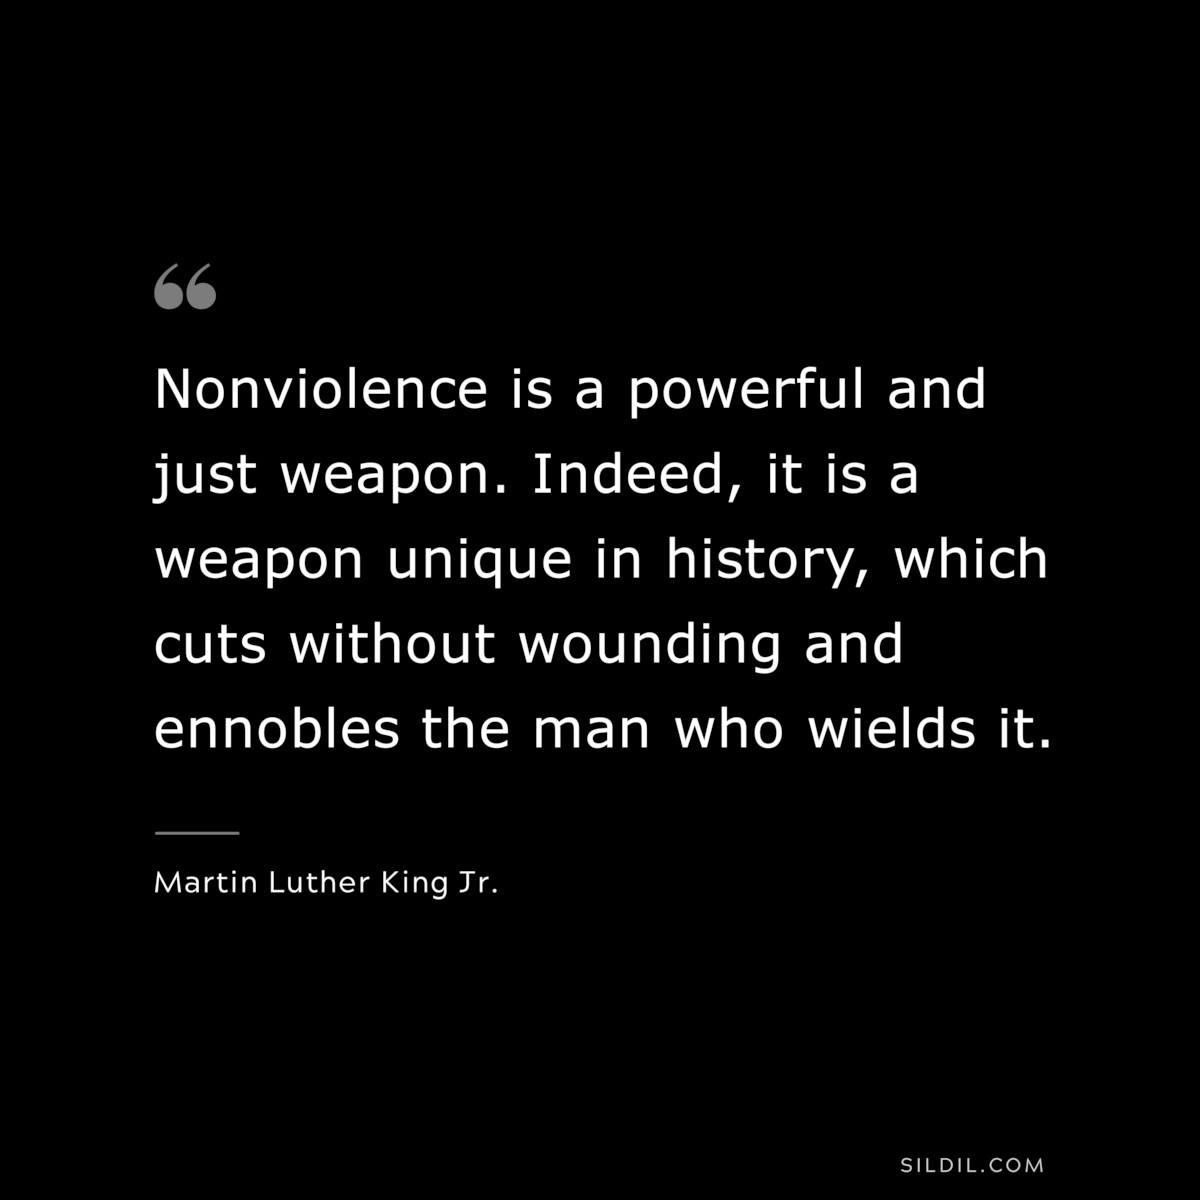 Nonviolence is a powerful and just weapon. Indeed, it is a weapon unique in history, which cuts without wounding and ennobles the man who wields it. ― Martin Luther King Jr.